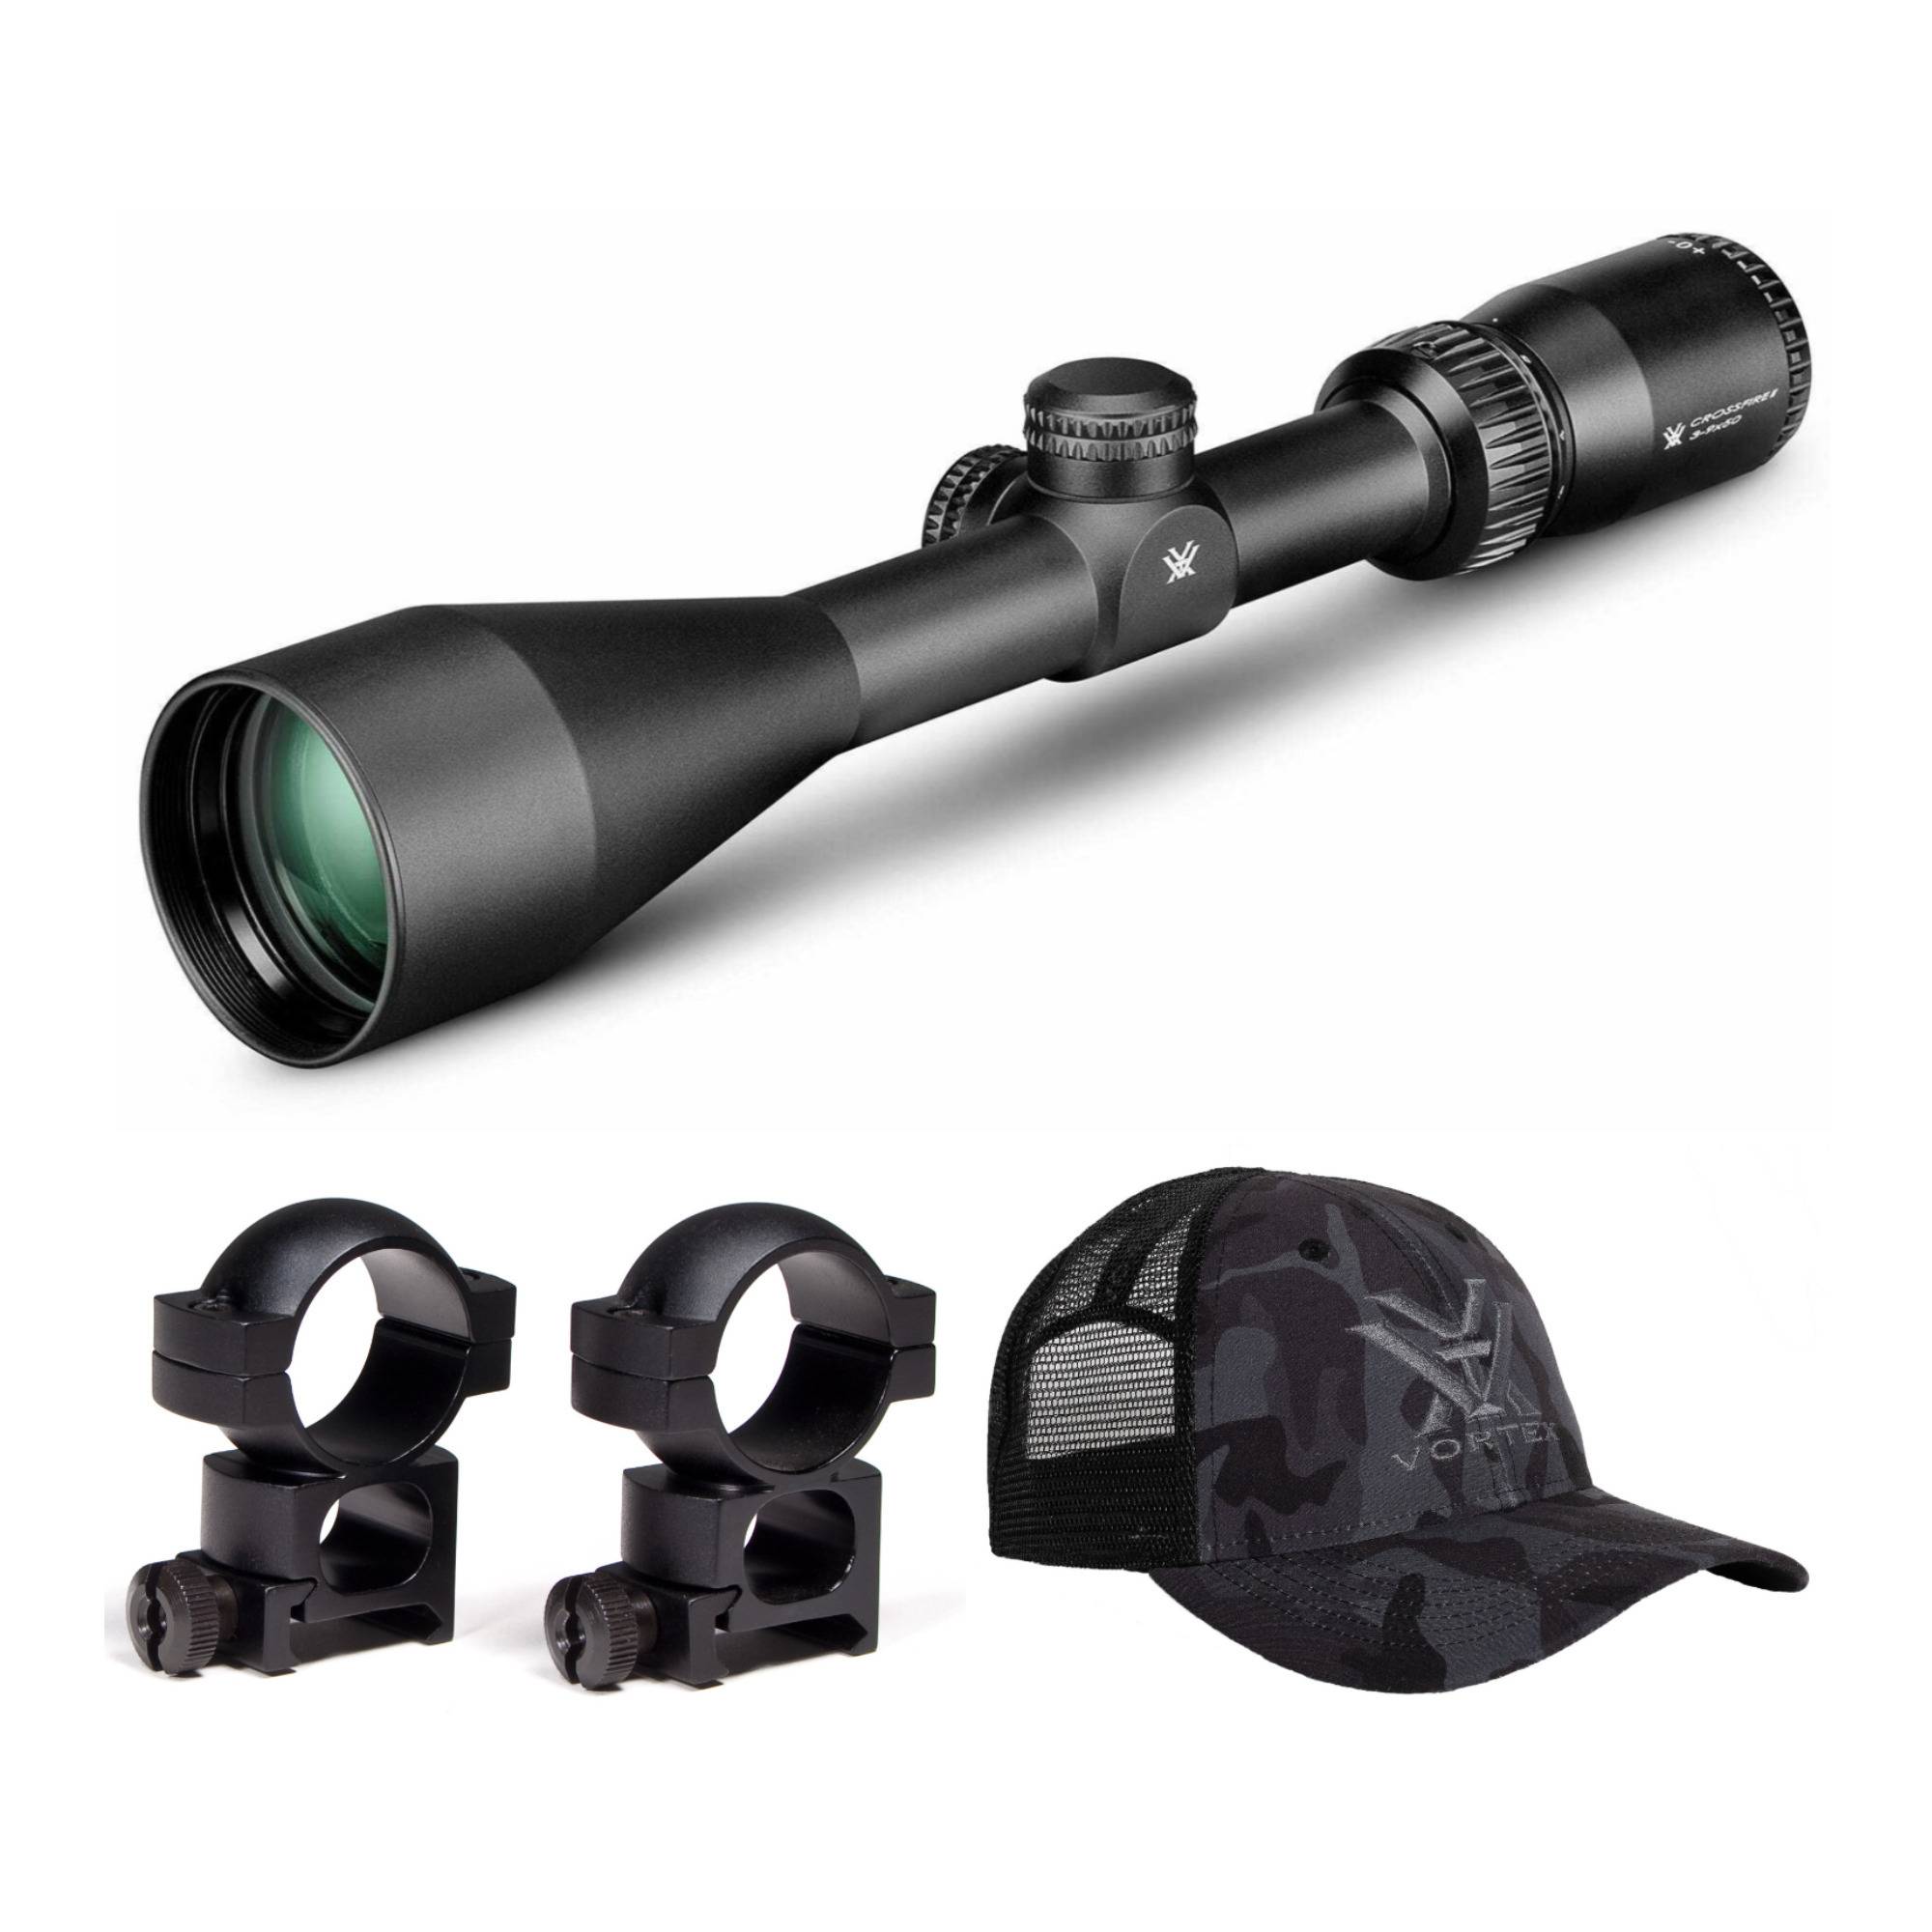 Vortex Crossfire II 3-9x50 Straight-Wall BDC Riflescope with 1-Inch Riflescope Rings and Hat